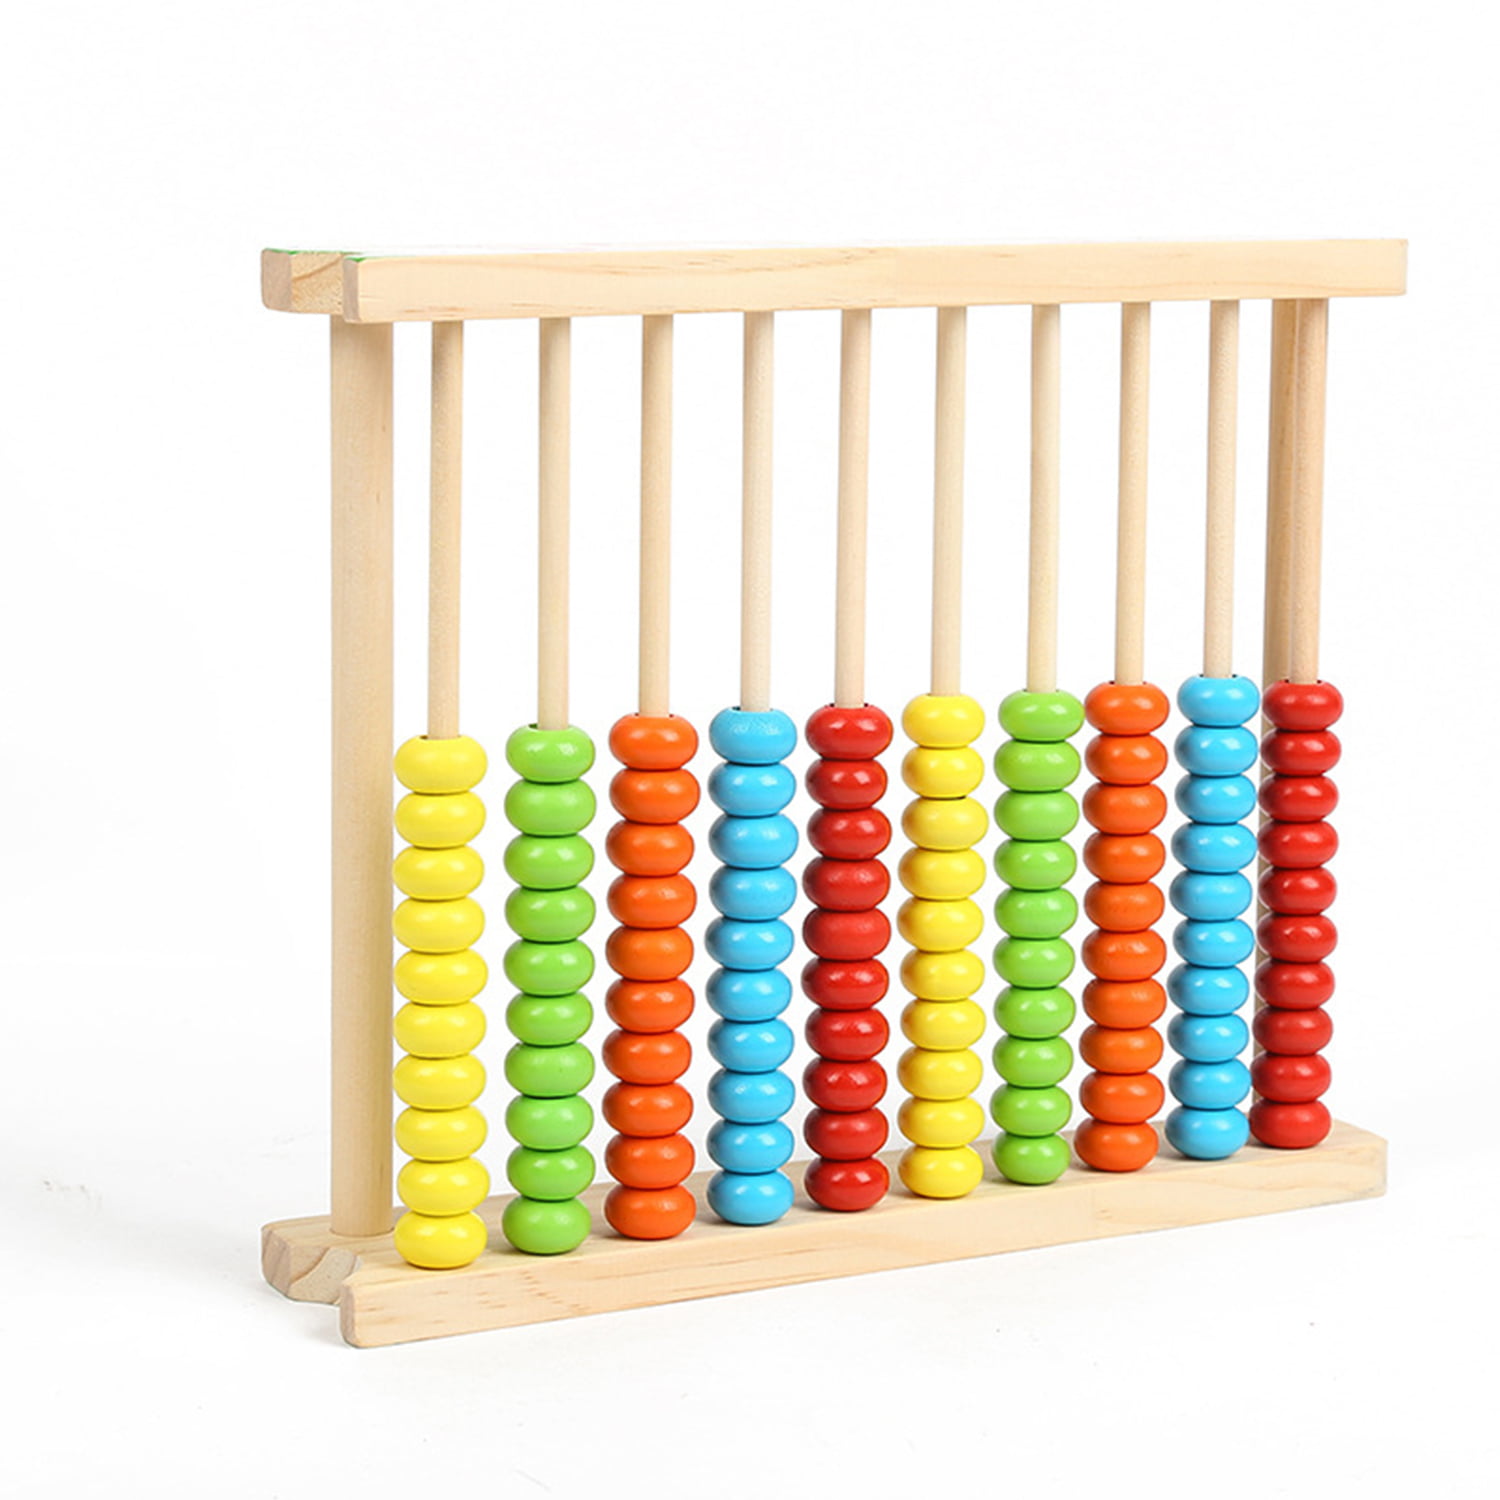 Wooden Colorful Bead Abacus Counting Math Kid Learning Educational Toy Xmas 